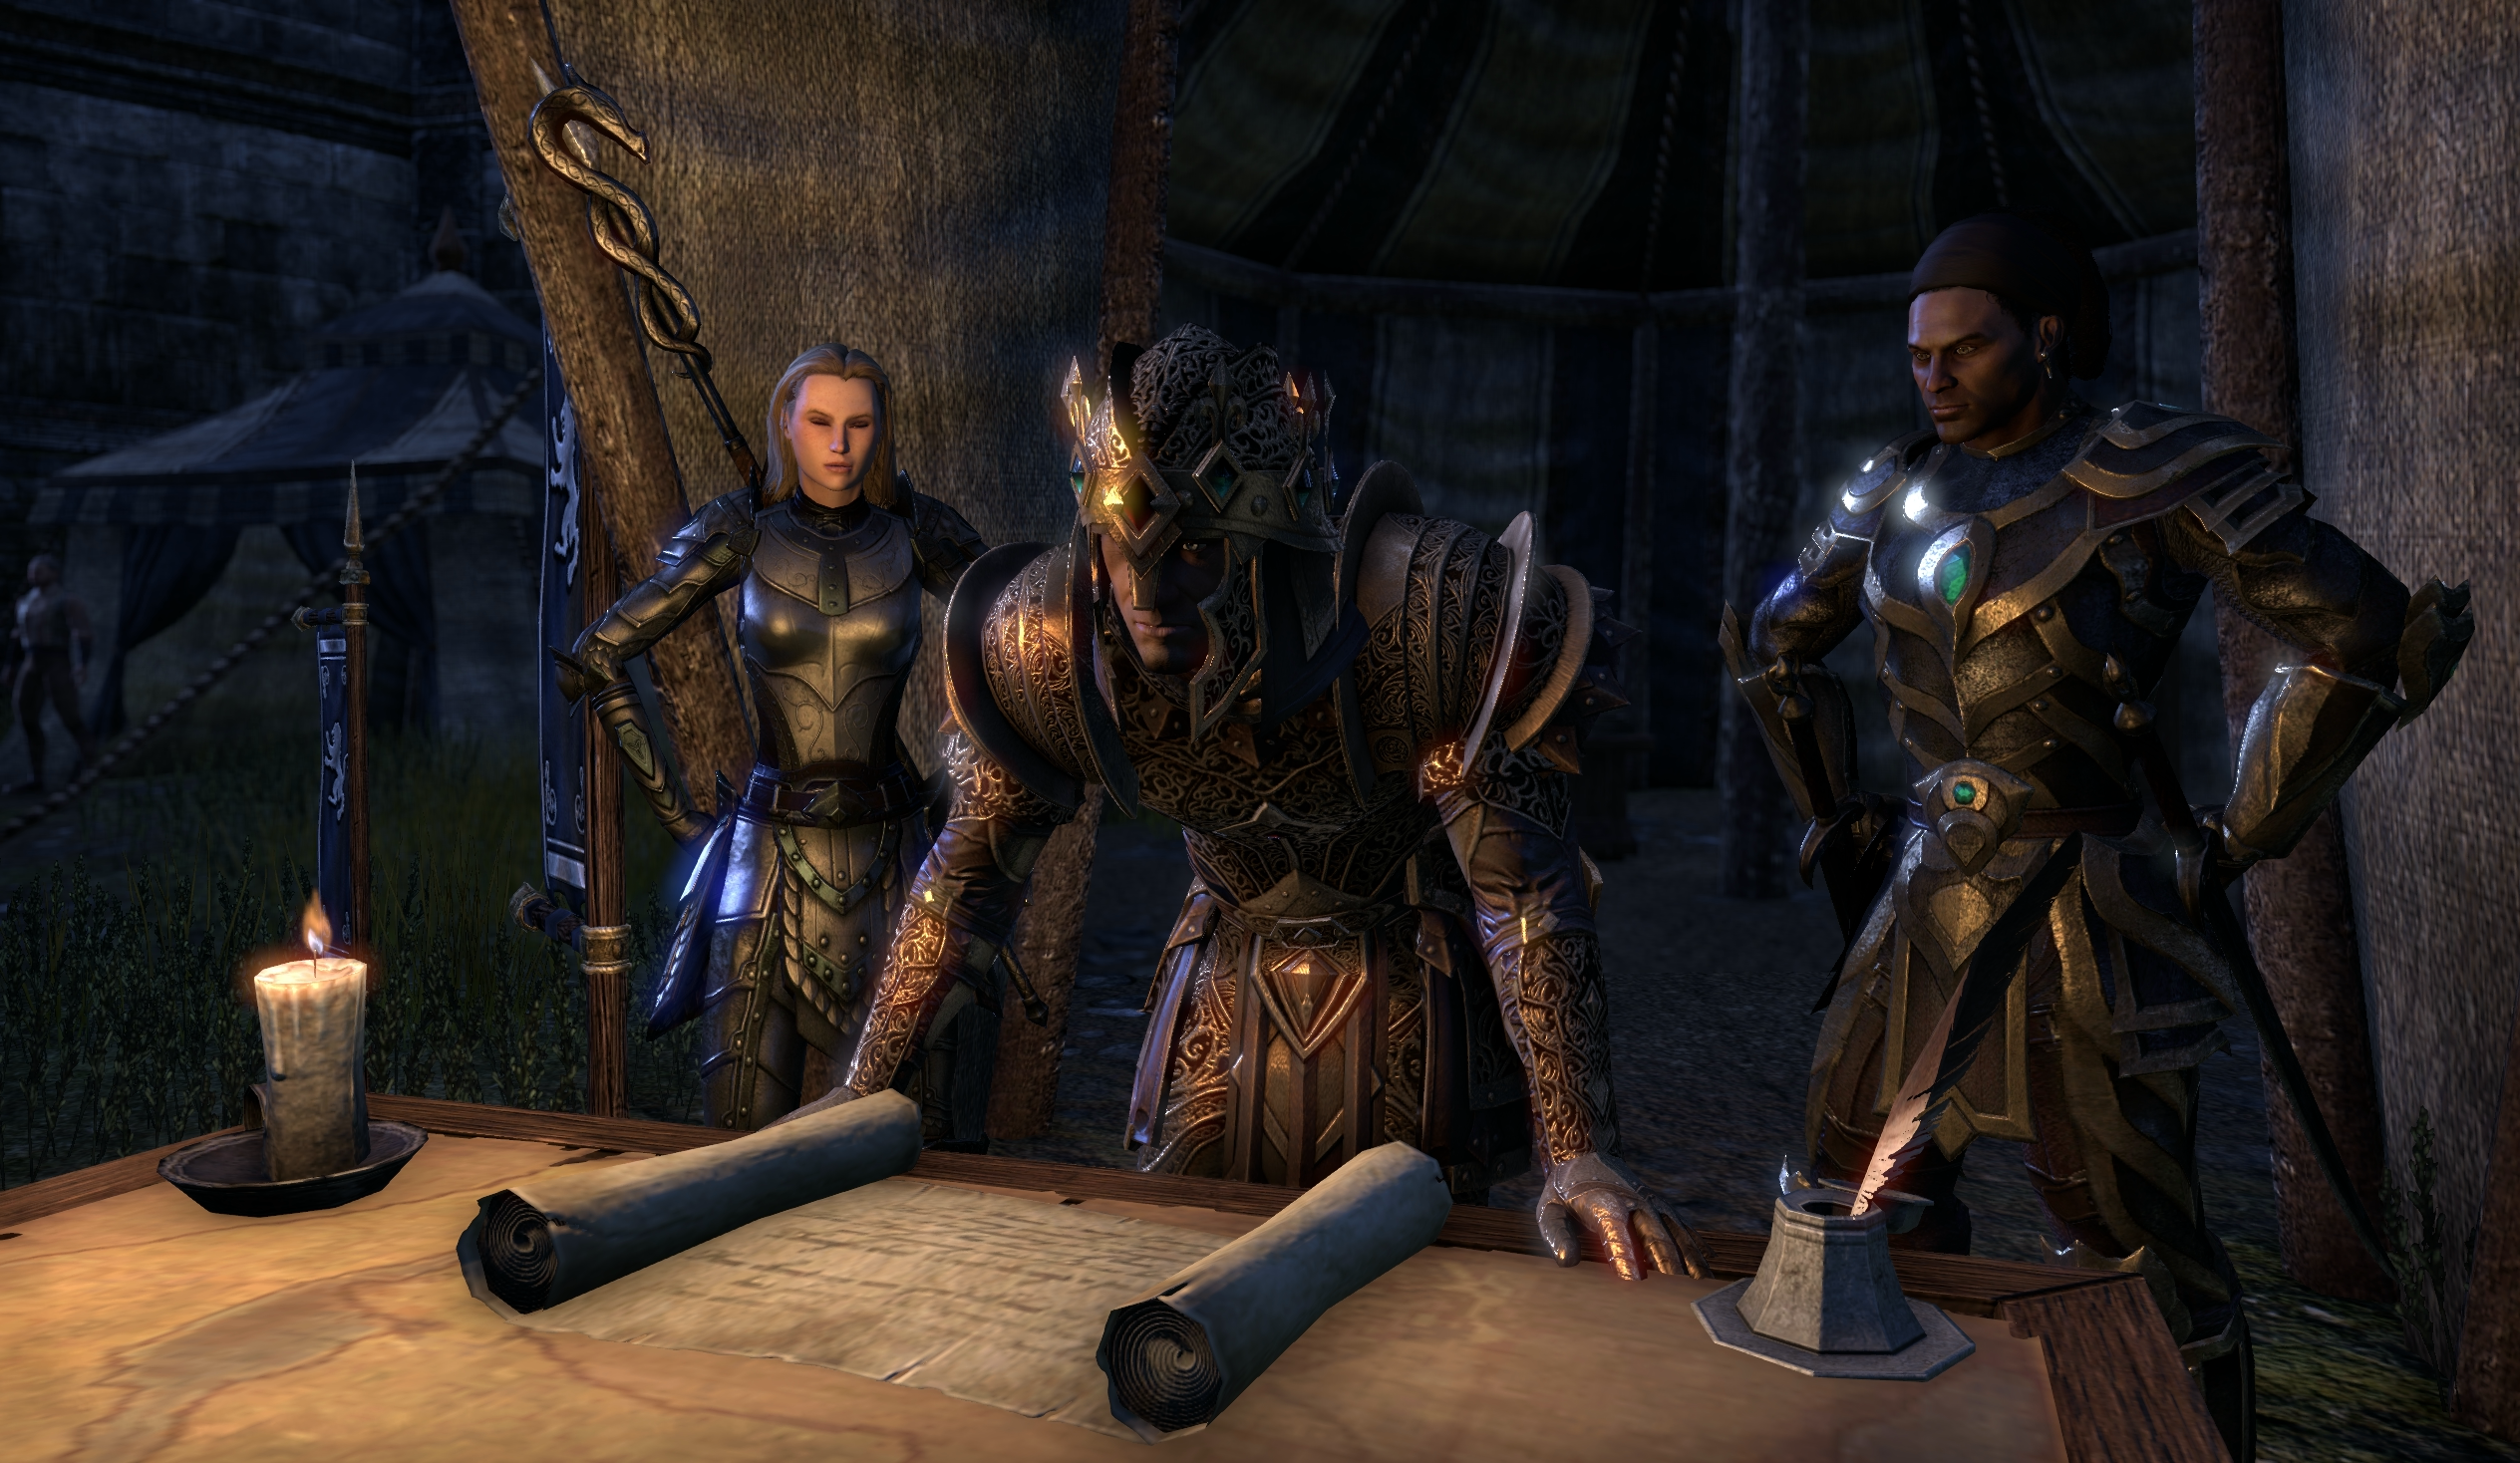 Watch The First Episode of ESO Live